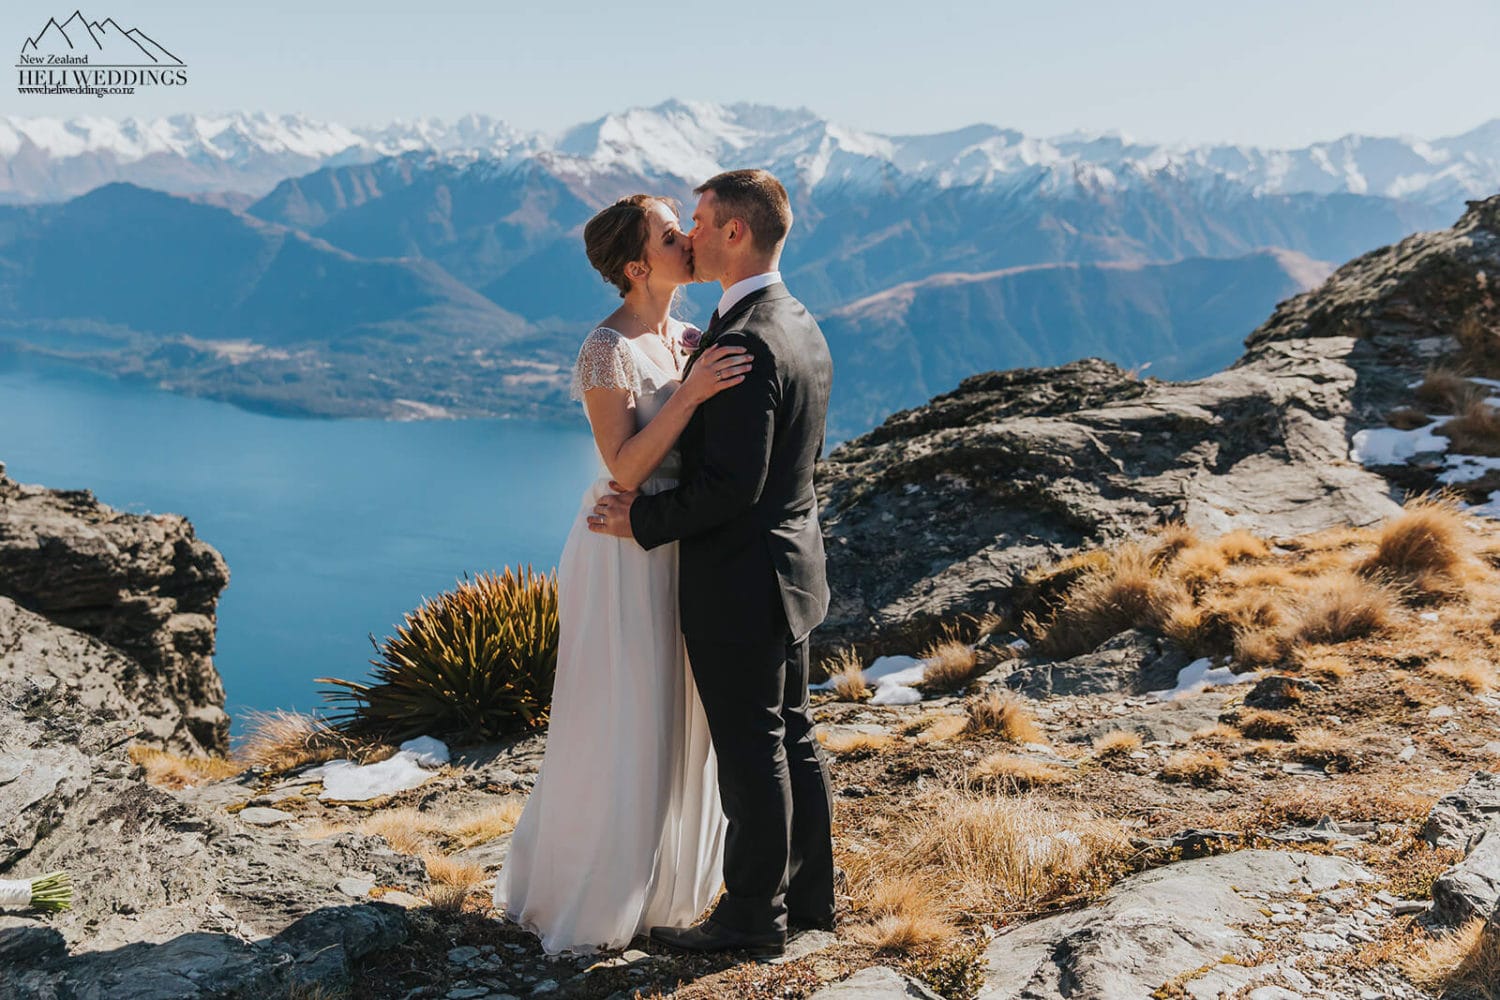 Heli wedding ceremony on The Ledge in Queenstown